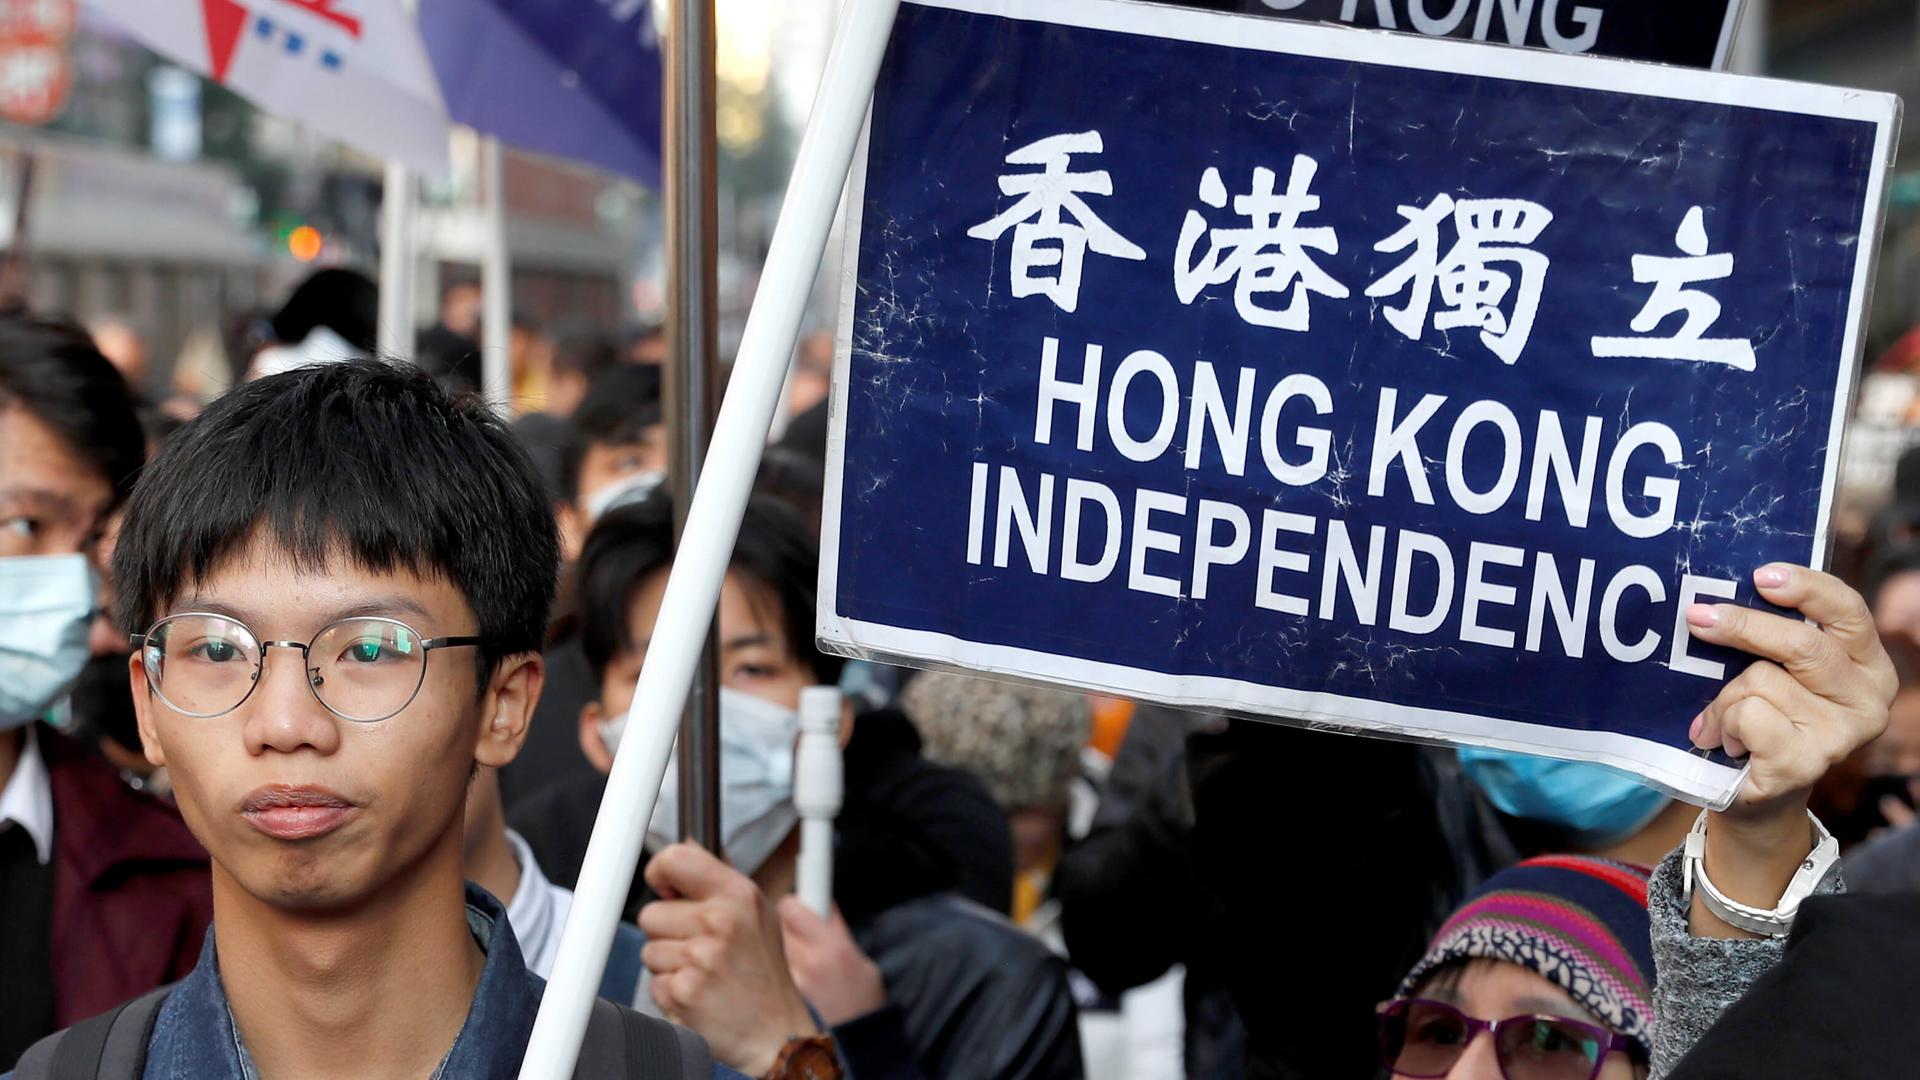 Protesters hold a sign calling for independence in Hong Kong.